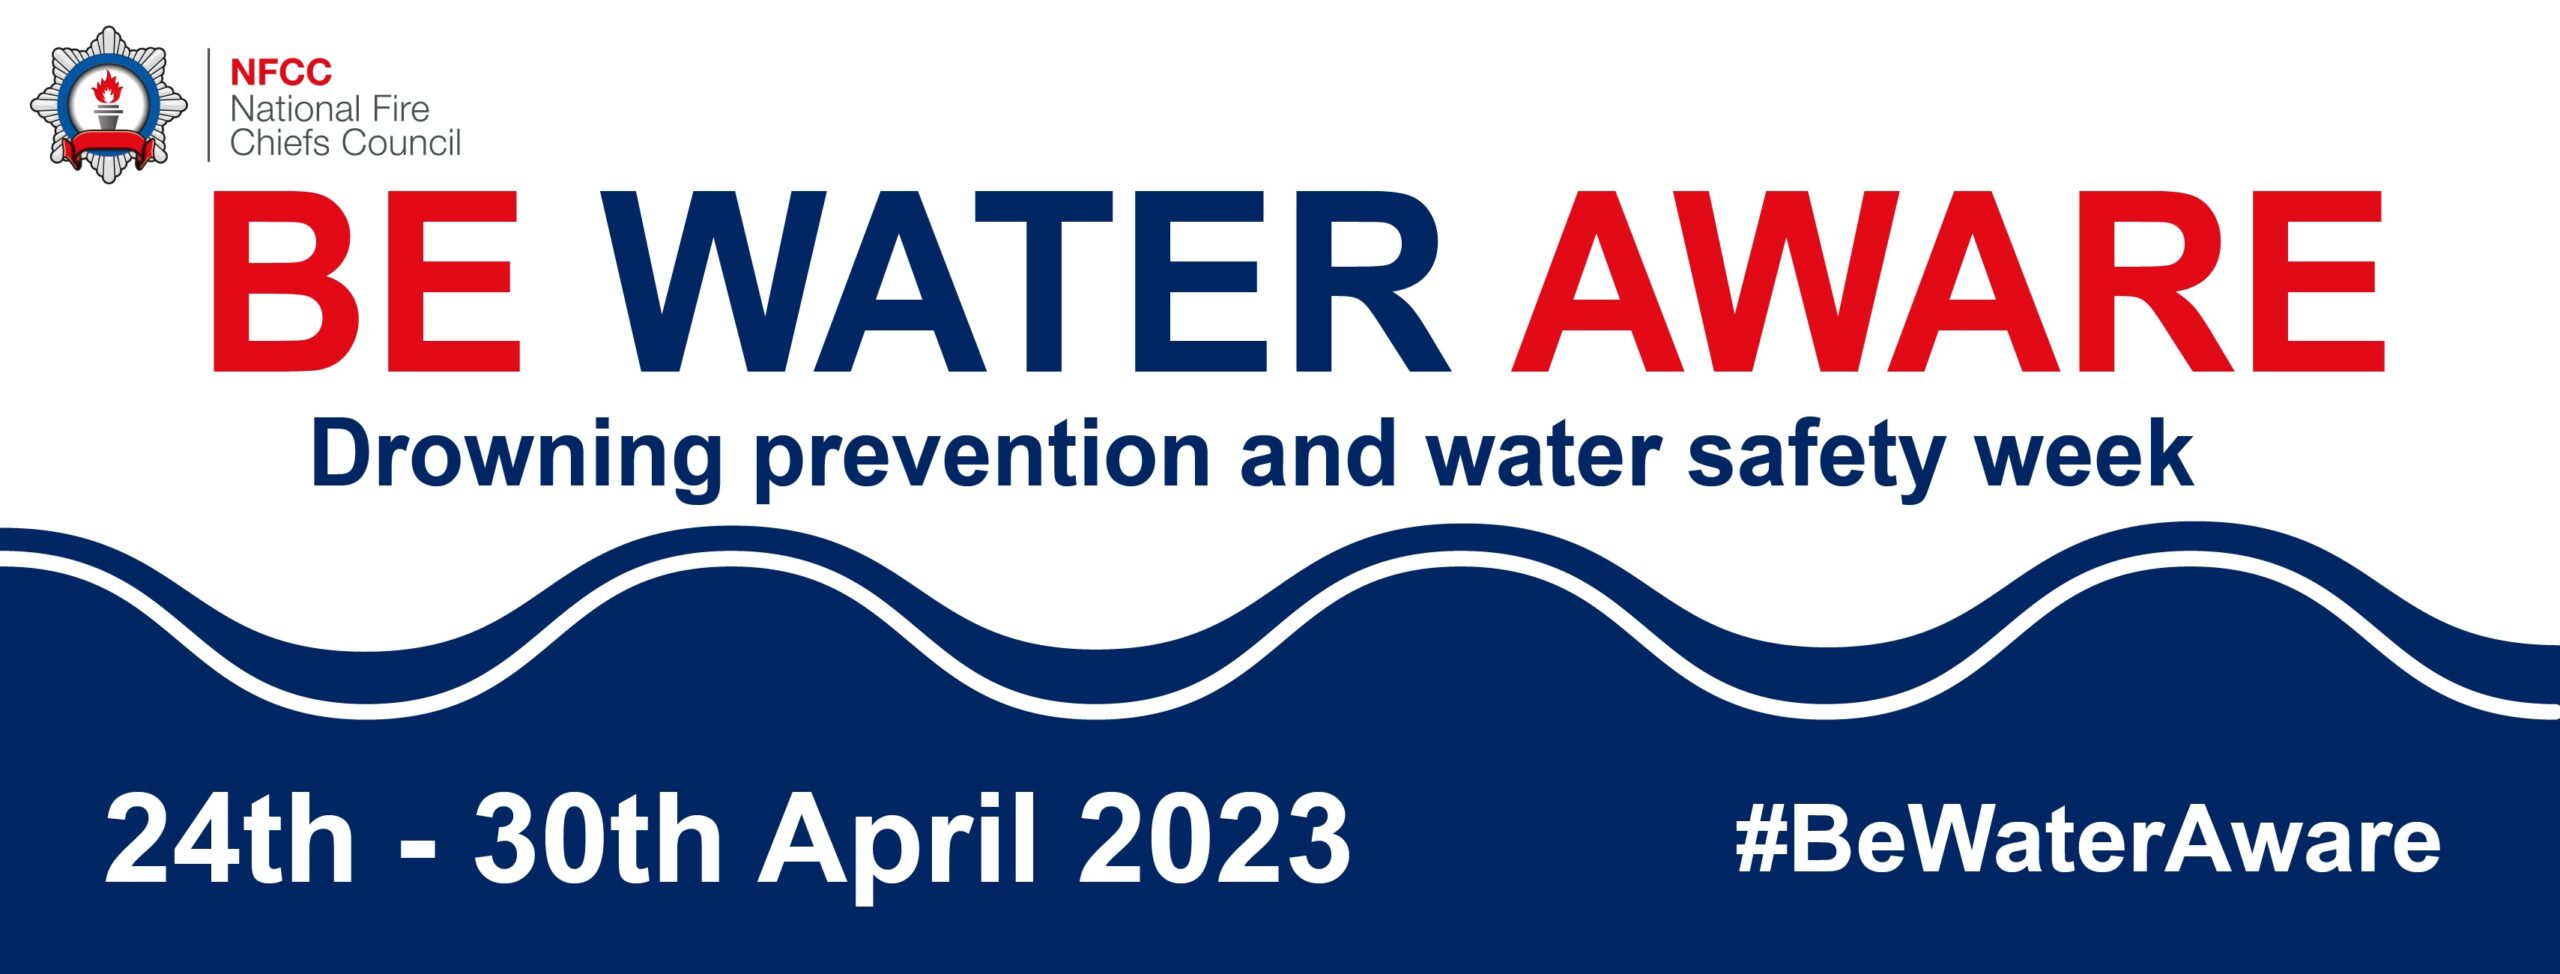 Be Water Aware banner.